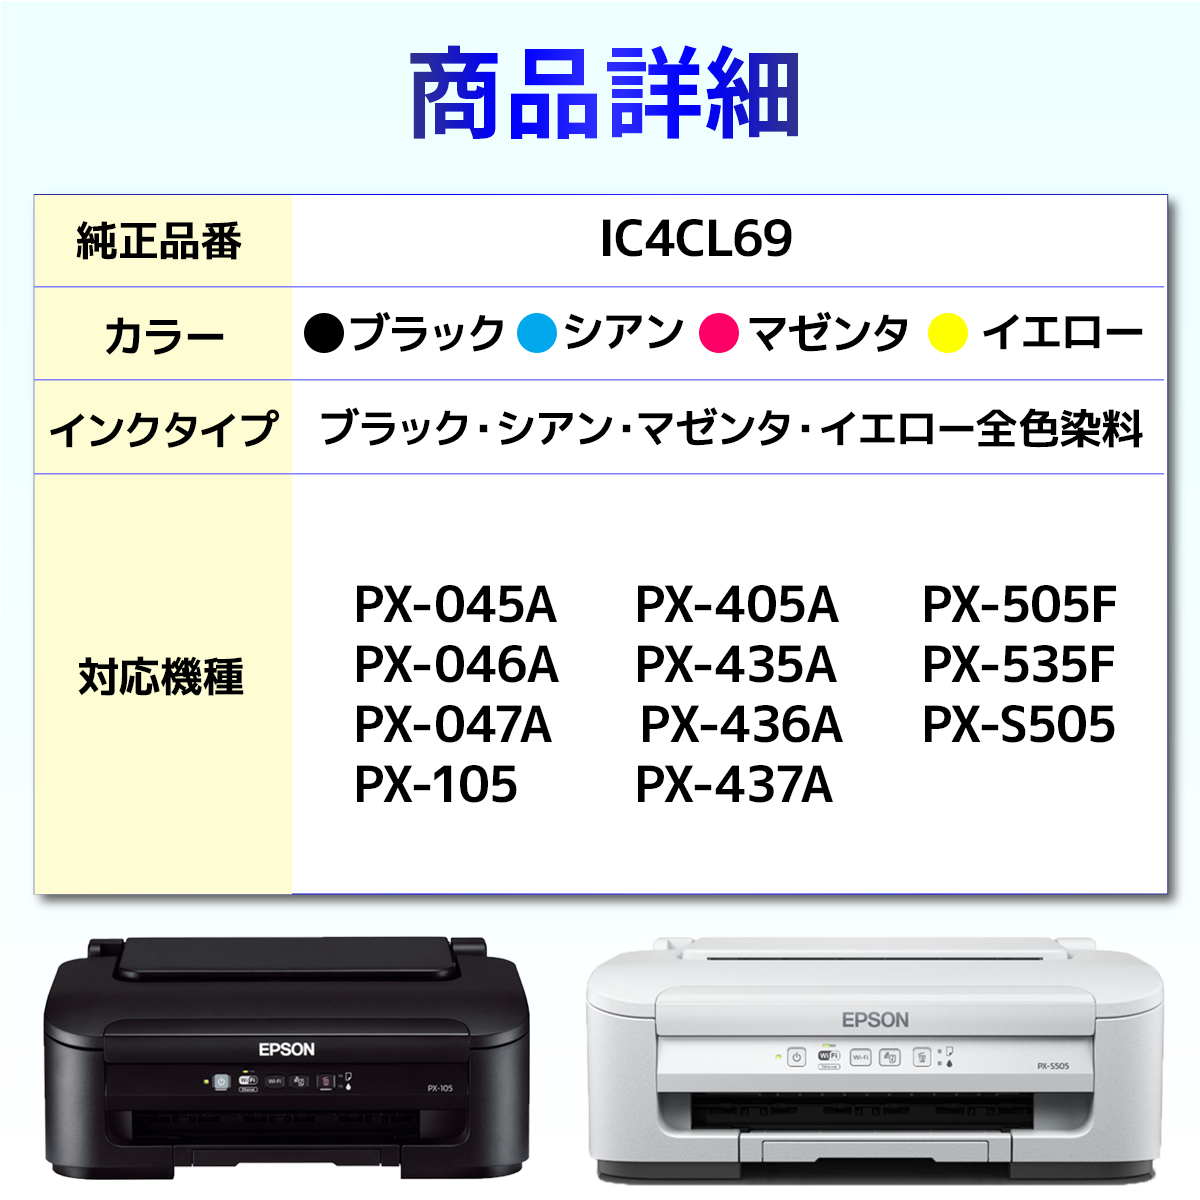 IC4CL69 IC69 互換 インク 砂時計 12個セット EPSON エプソン PX-045A PX-046A PX-047A PX-105 PX-405A PX-435A PX-436A PX-437A PX-505F PX-535F PX-S505｜baustore｜03